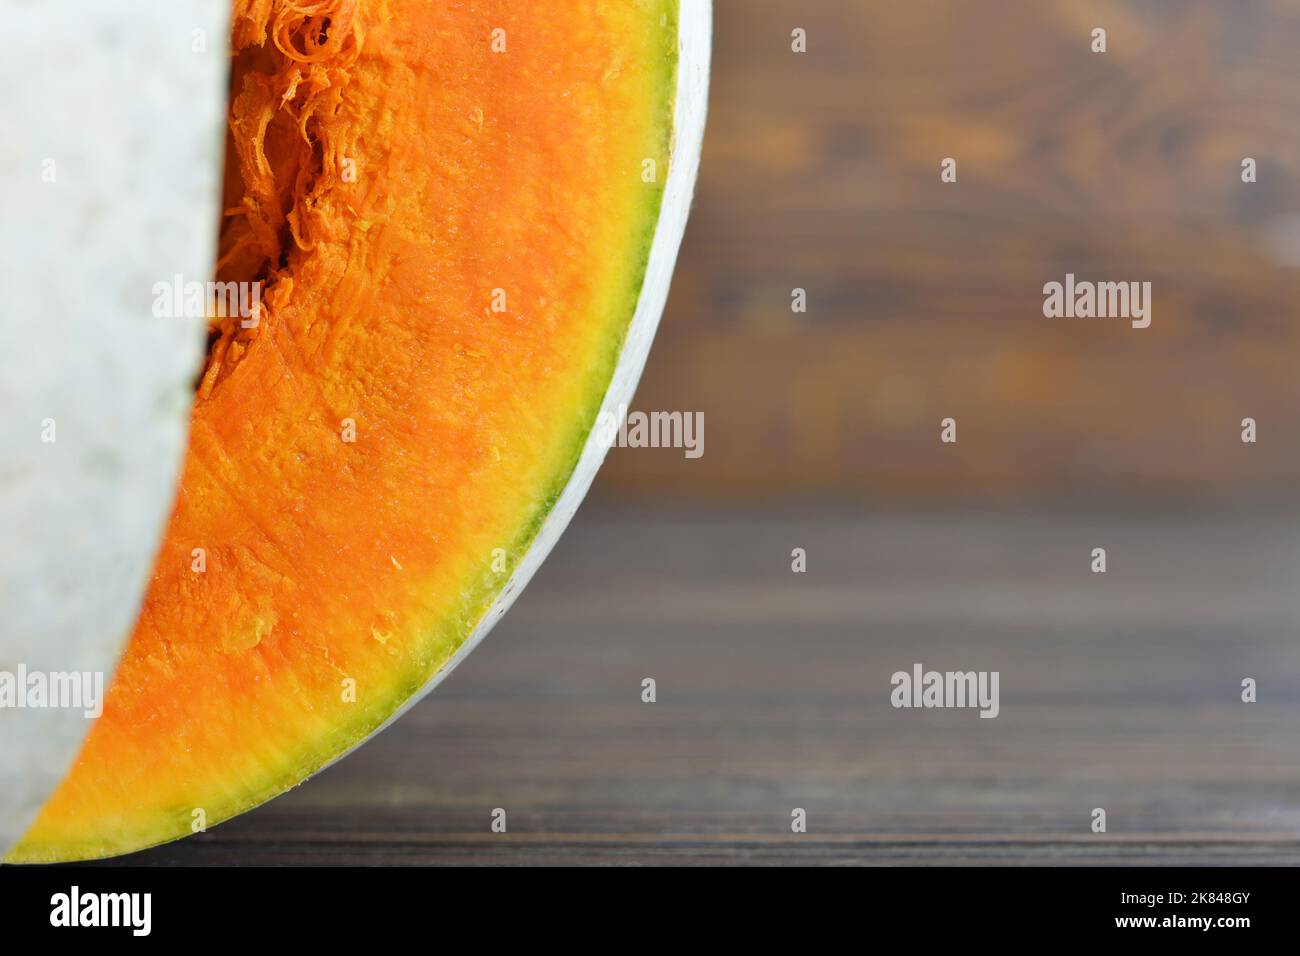 Pumpkin on wooden background with copy space Stock Photo